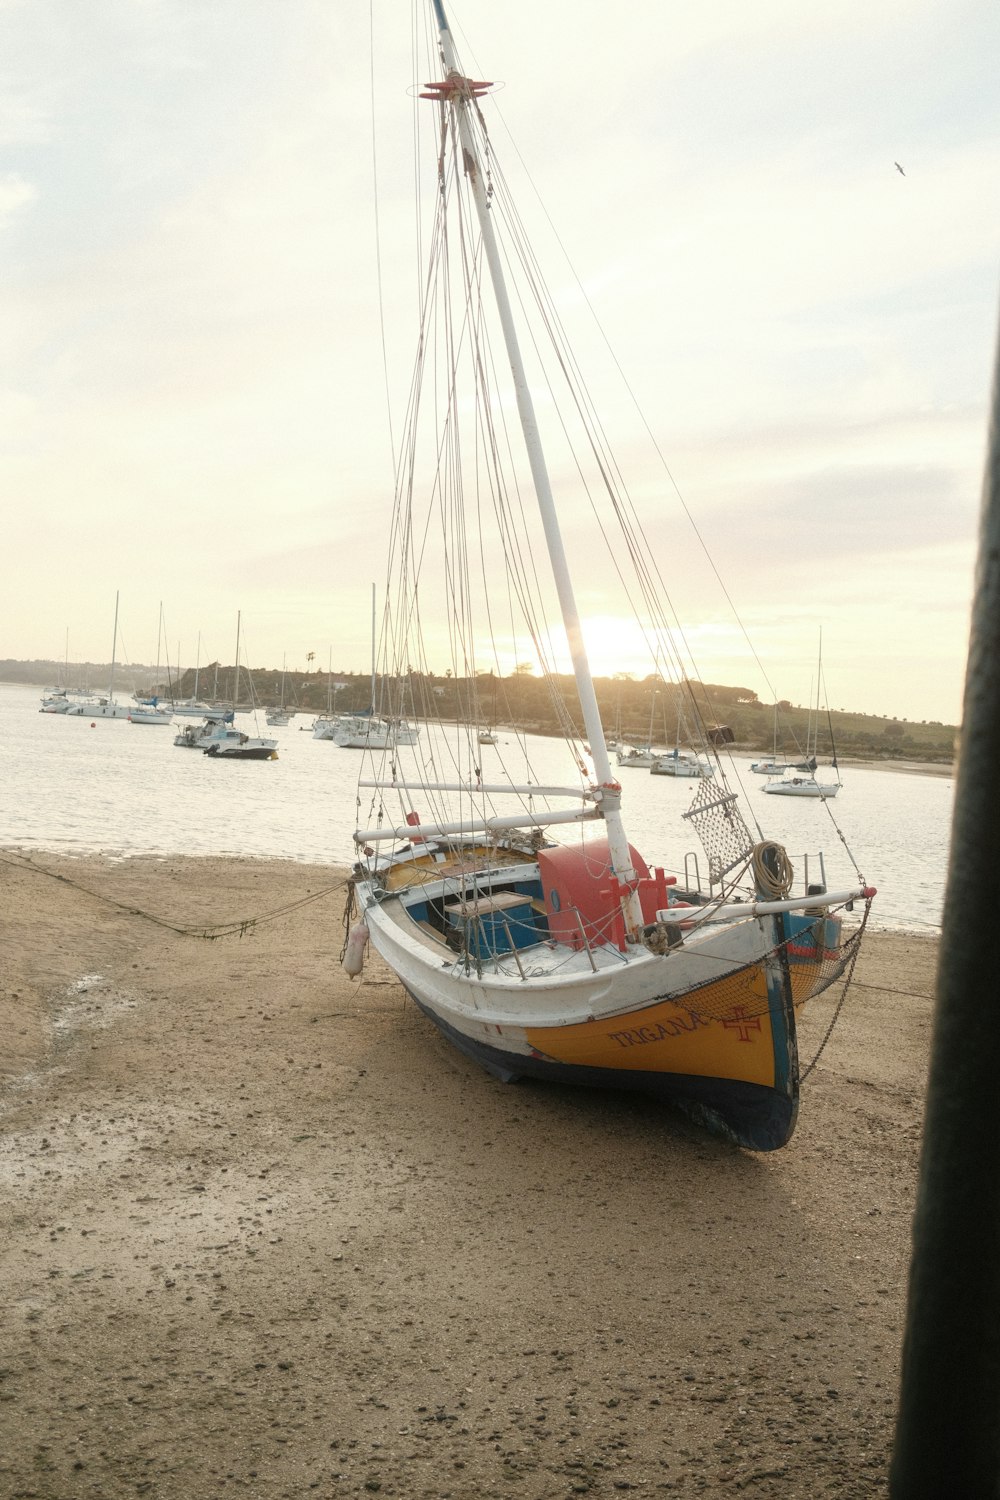 a sailboat on the beach with other boats in the water